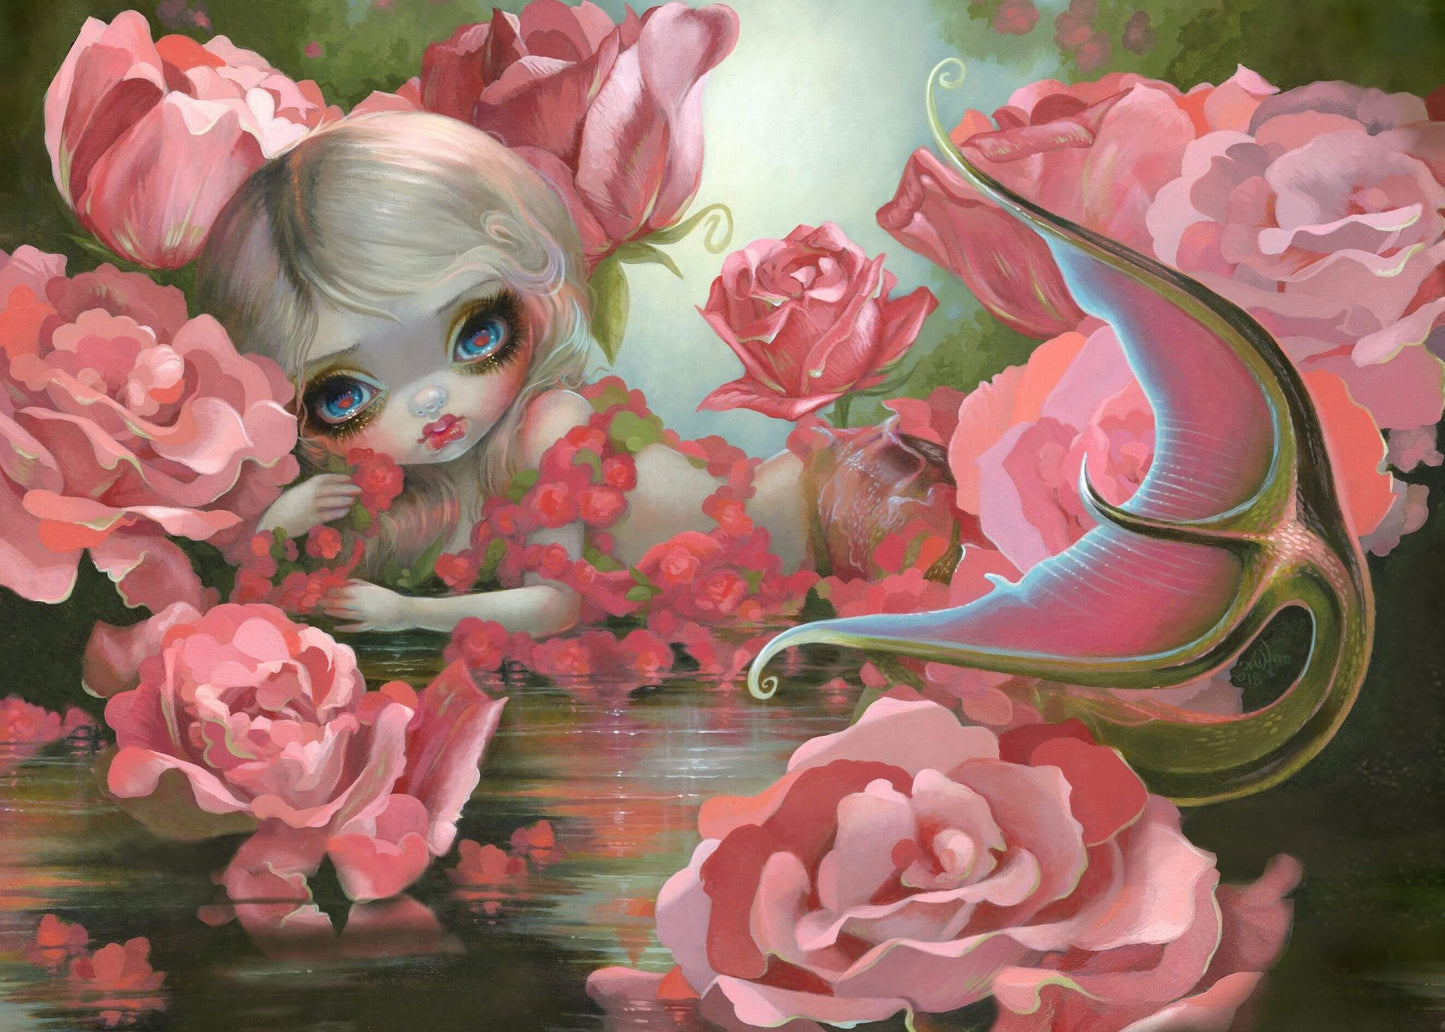 Mermaid with Pink Roses by Jasmine Becket-Griffith